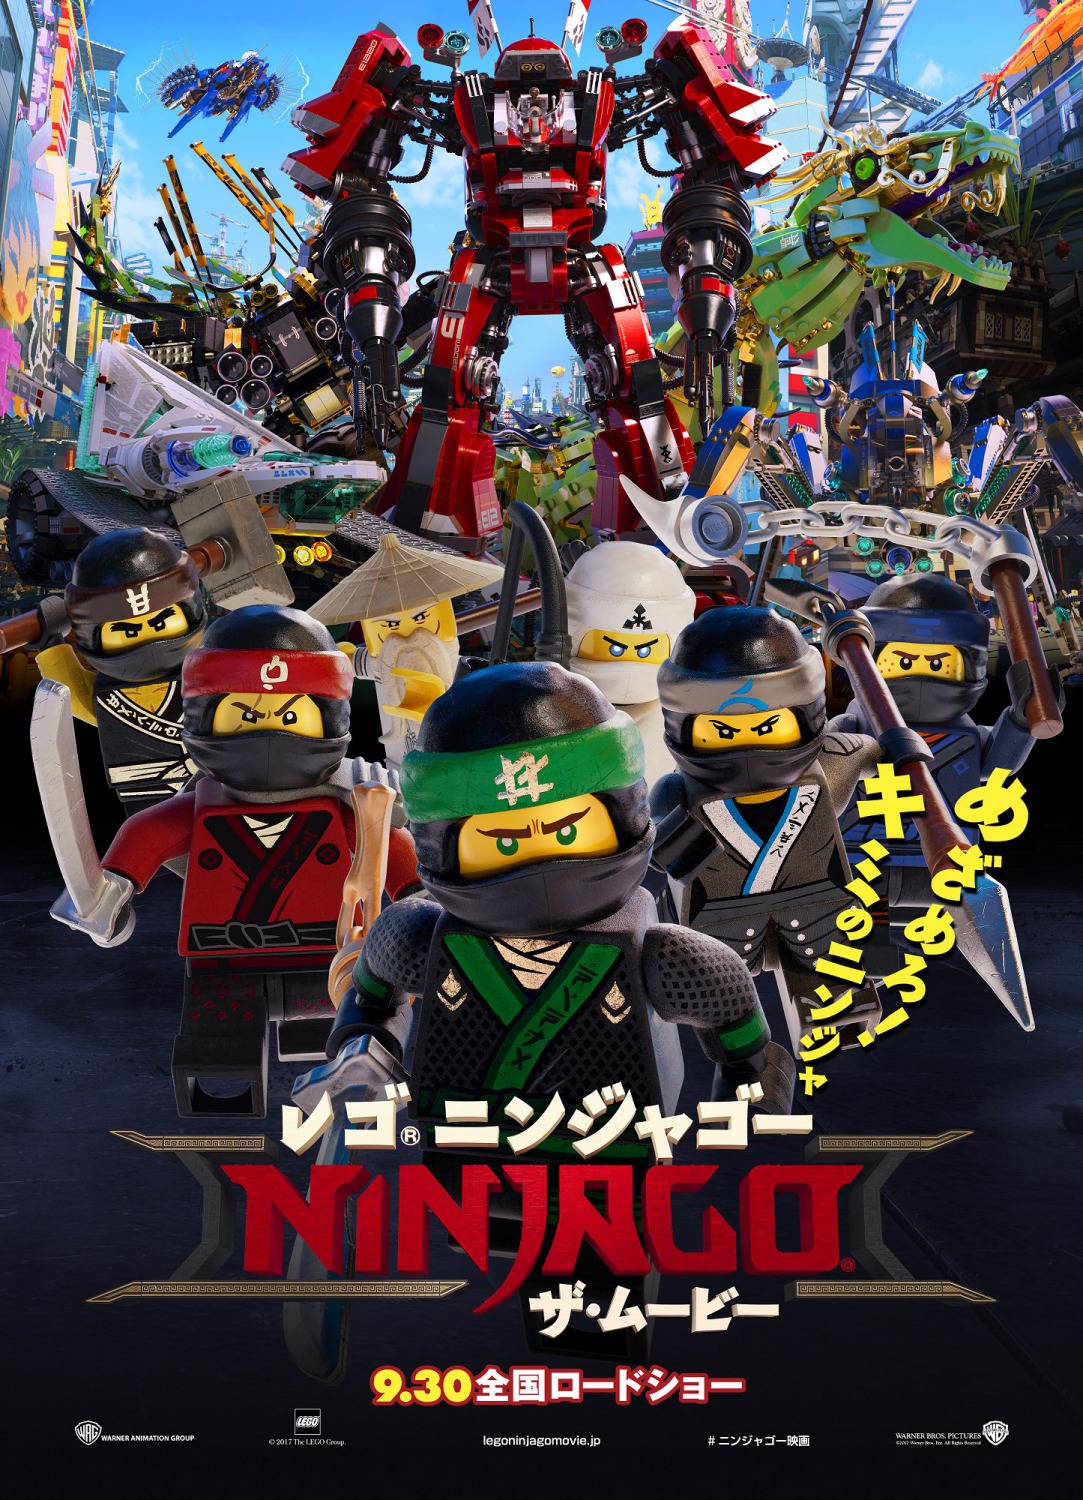 Extra Large Movie Poster Image for The Lego Ninjago Movie (#13 of 36)